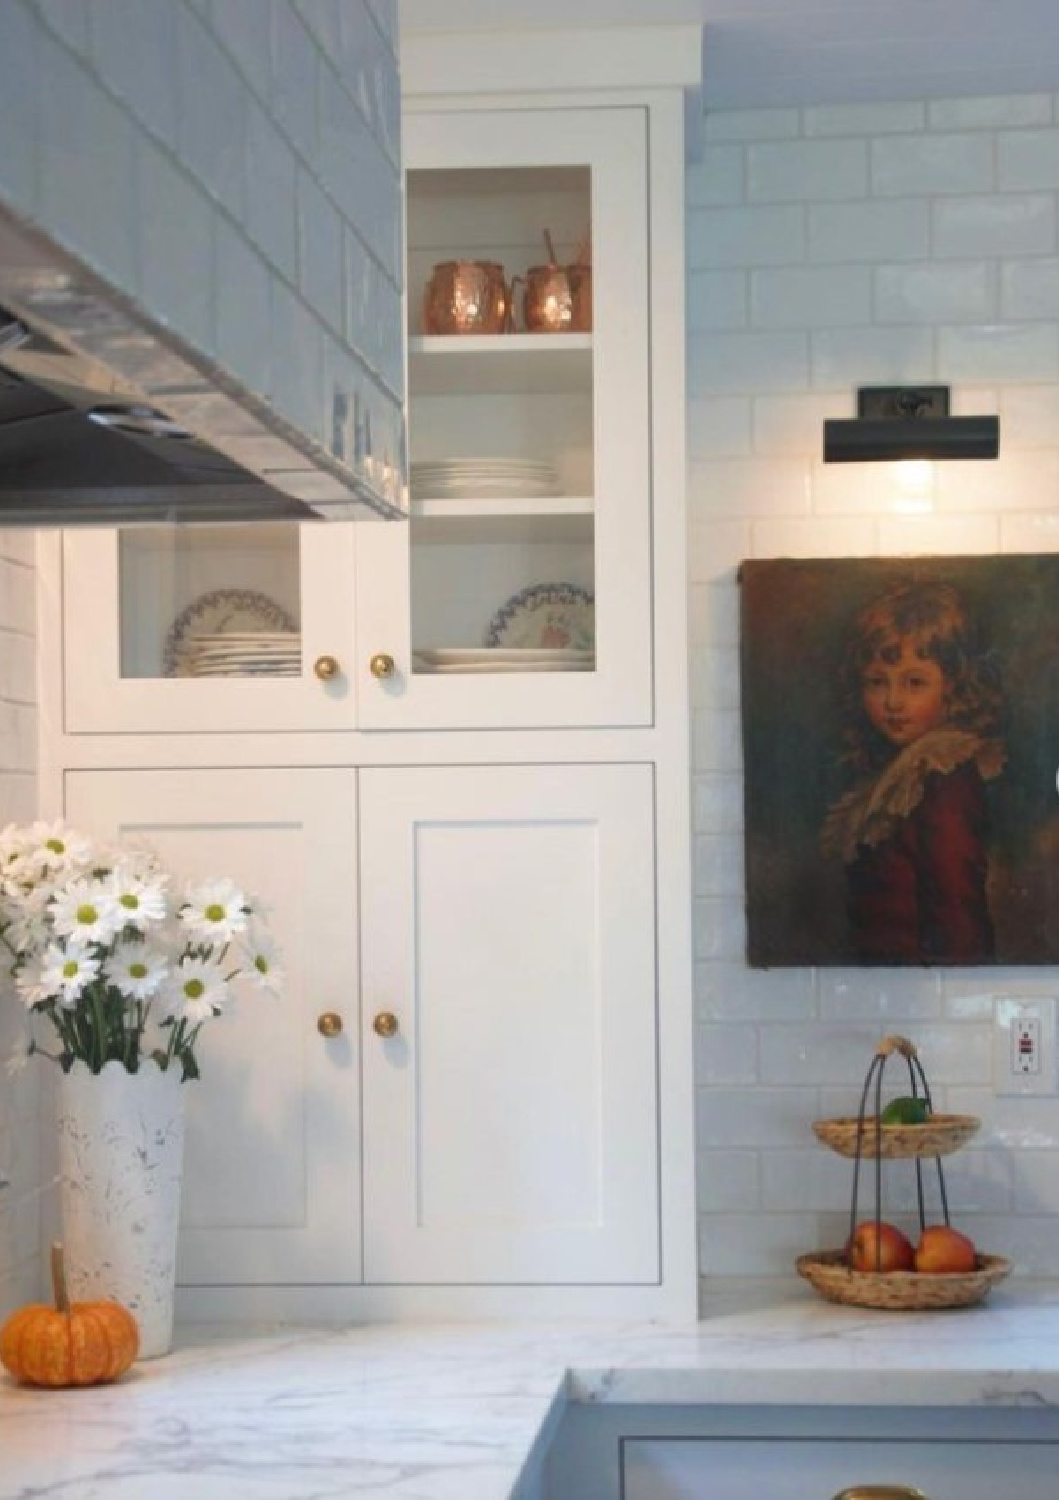 Fall vibes in a beautiful white Shaker kitchen with subway tile - @gwenmossblog. #fallkitchens